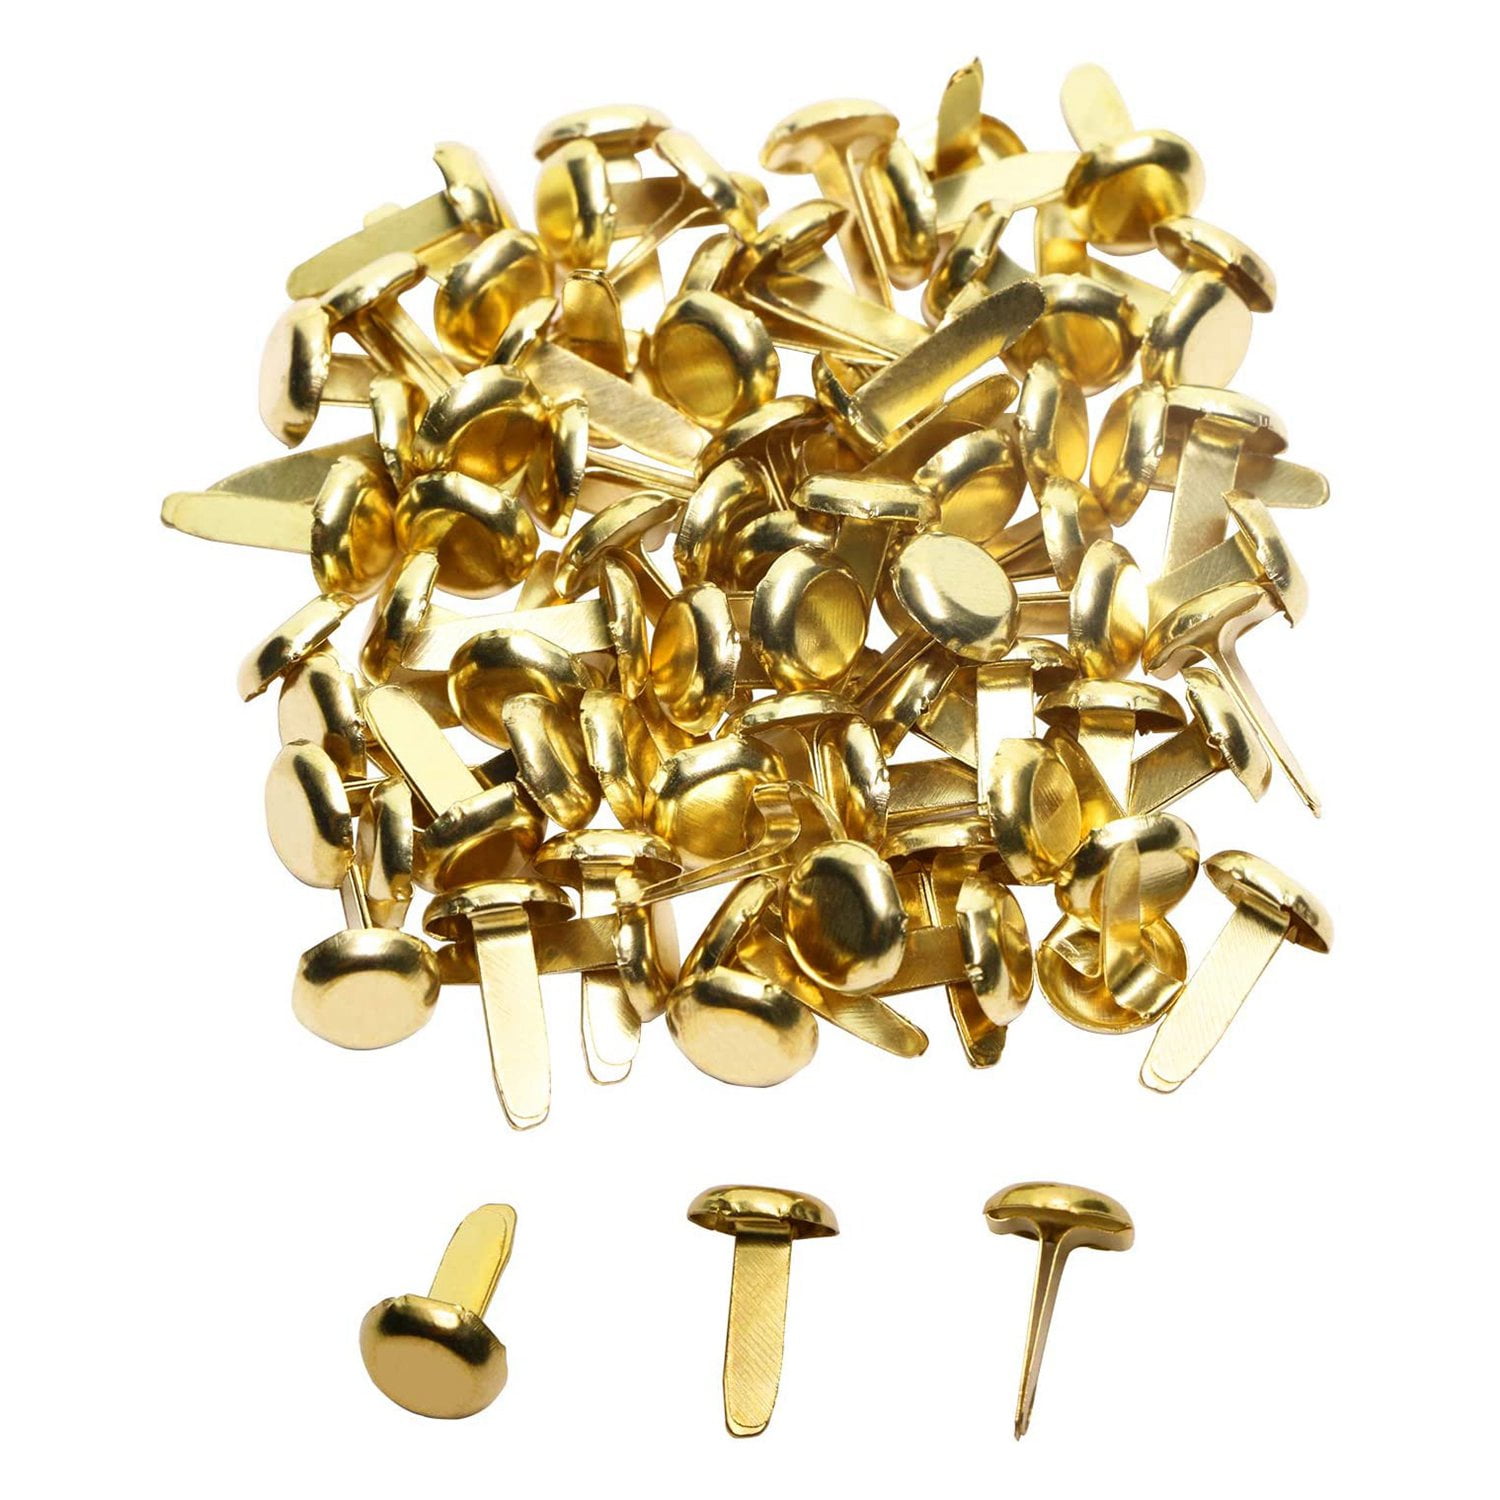 8x17mm Plated Mini Brads for Scrapbooking Crafts DIY Projects 100 Pcs Brass Paper Fasteners Multicolor 